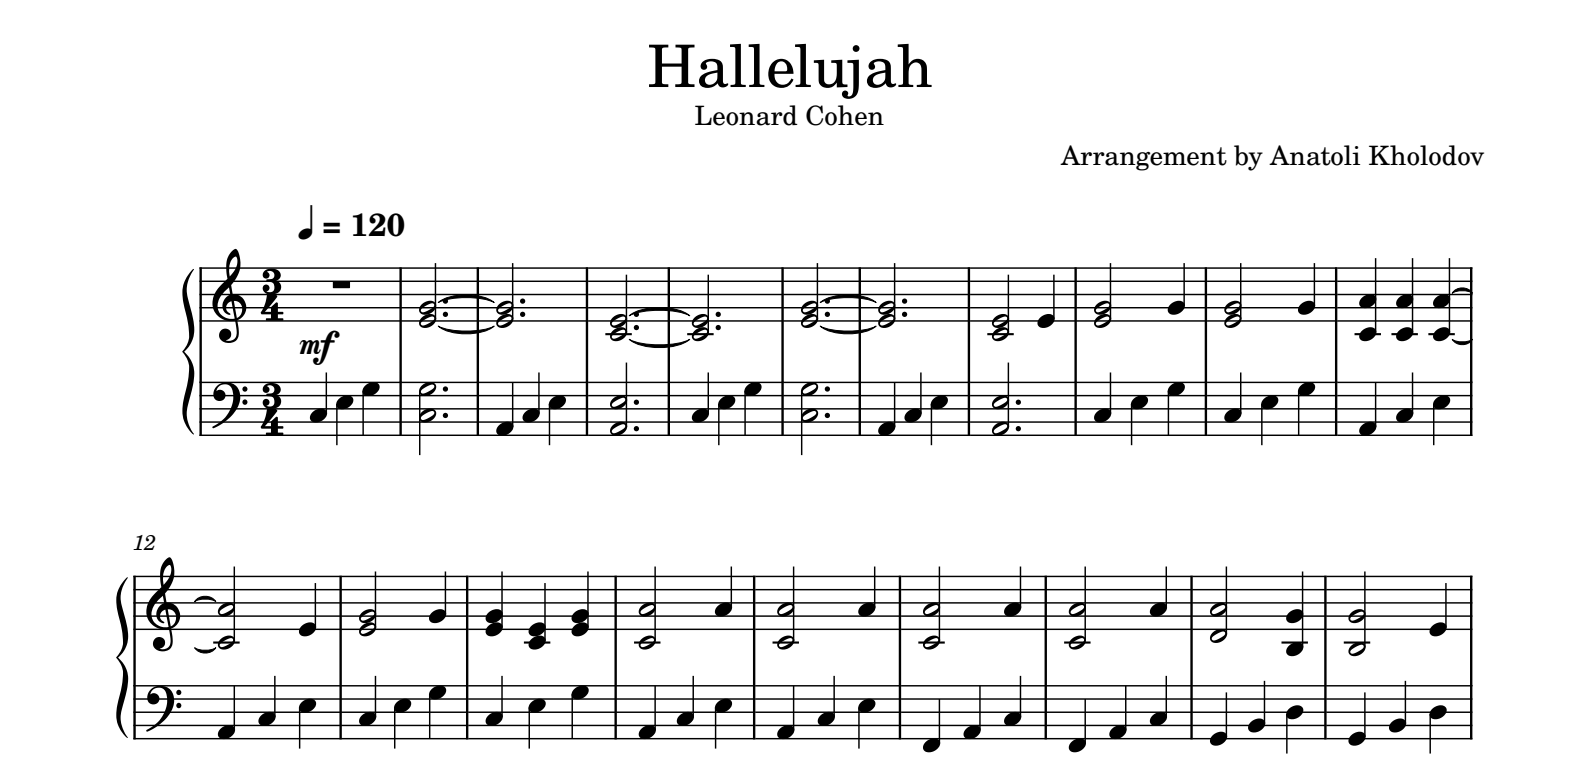 Hallelujah For Piano Sheet Music And Midi Files For Piano 